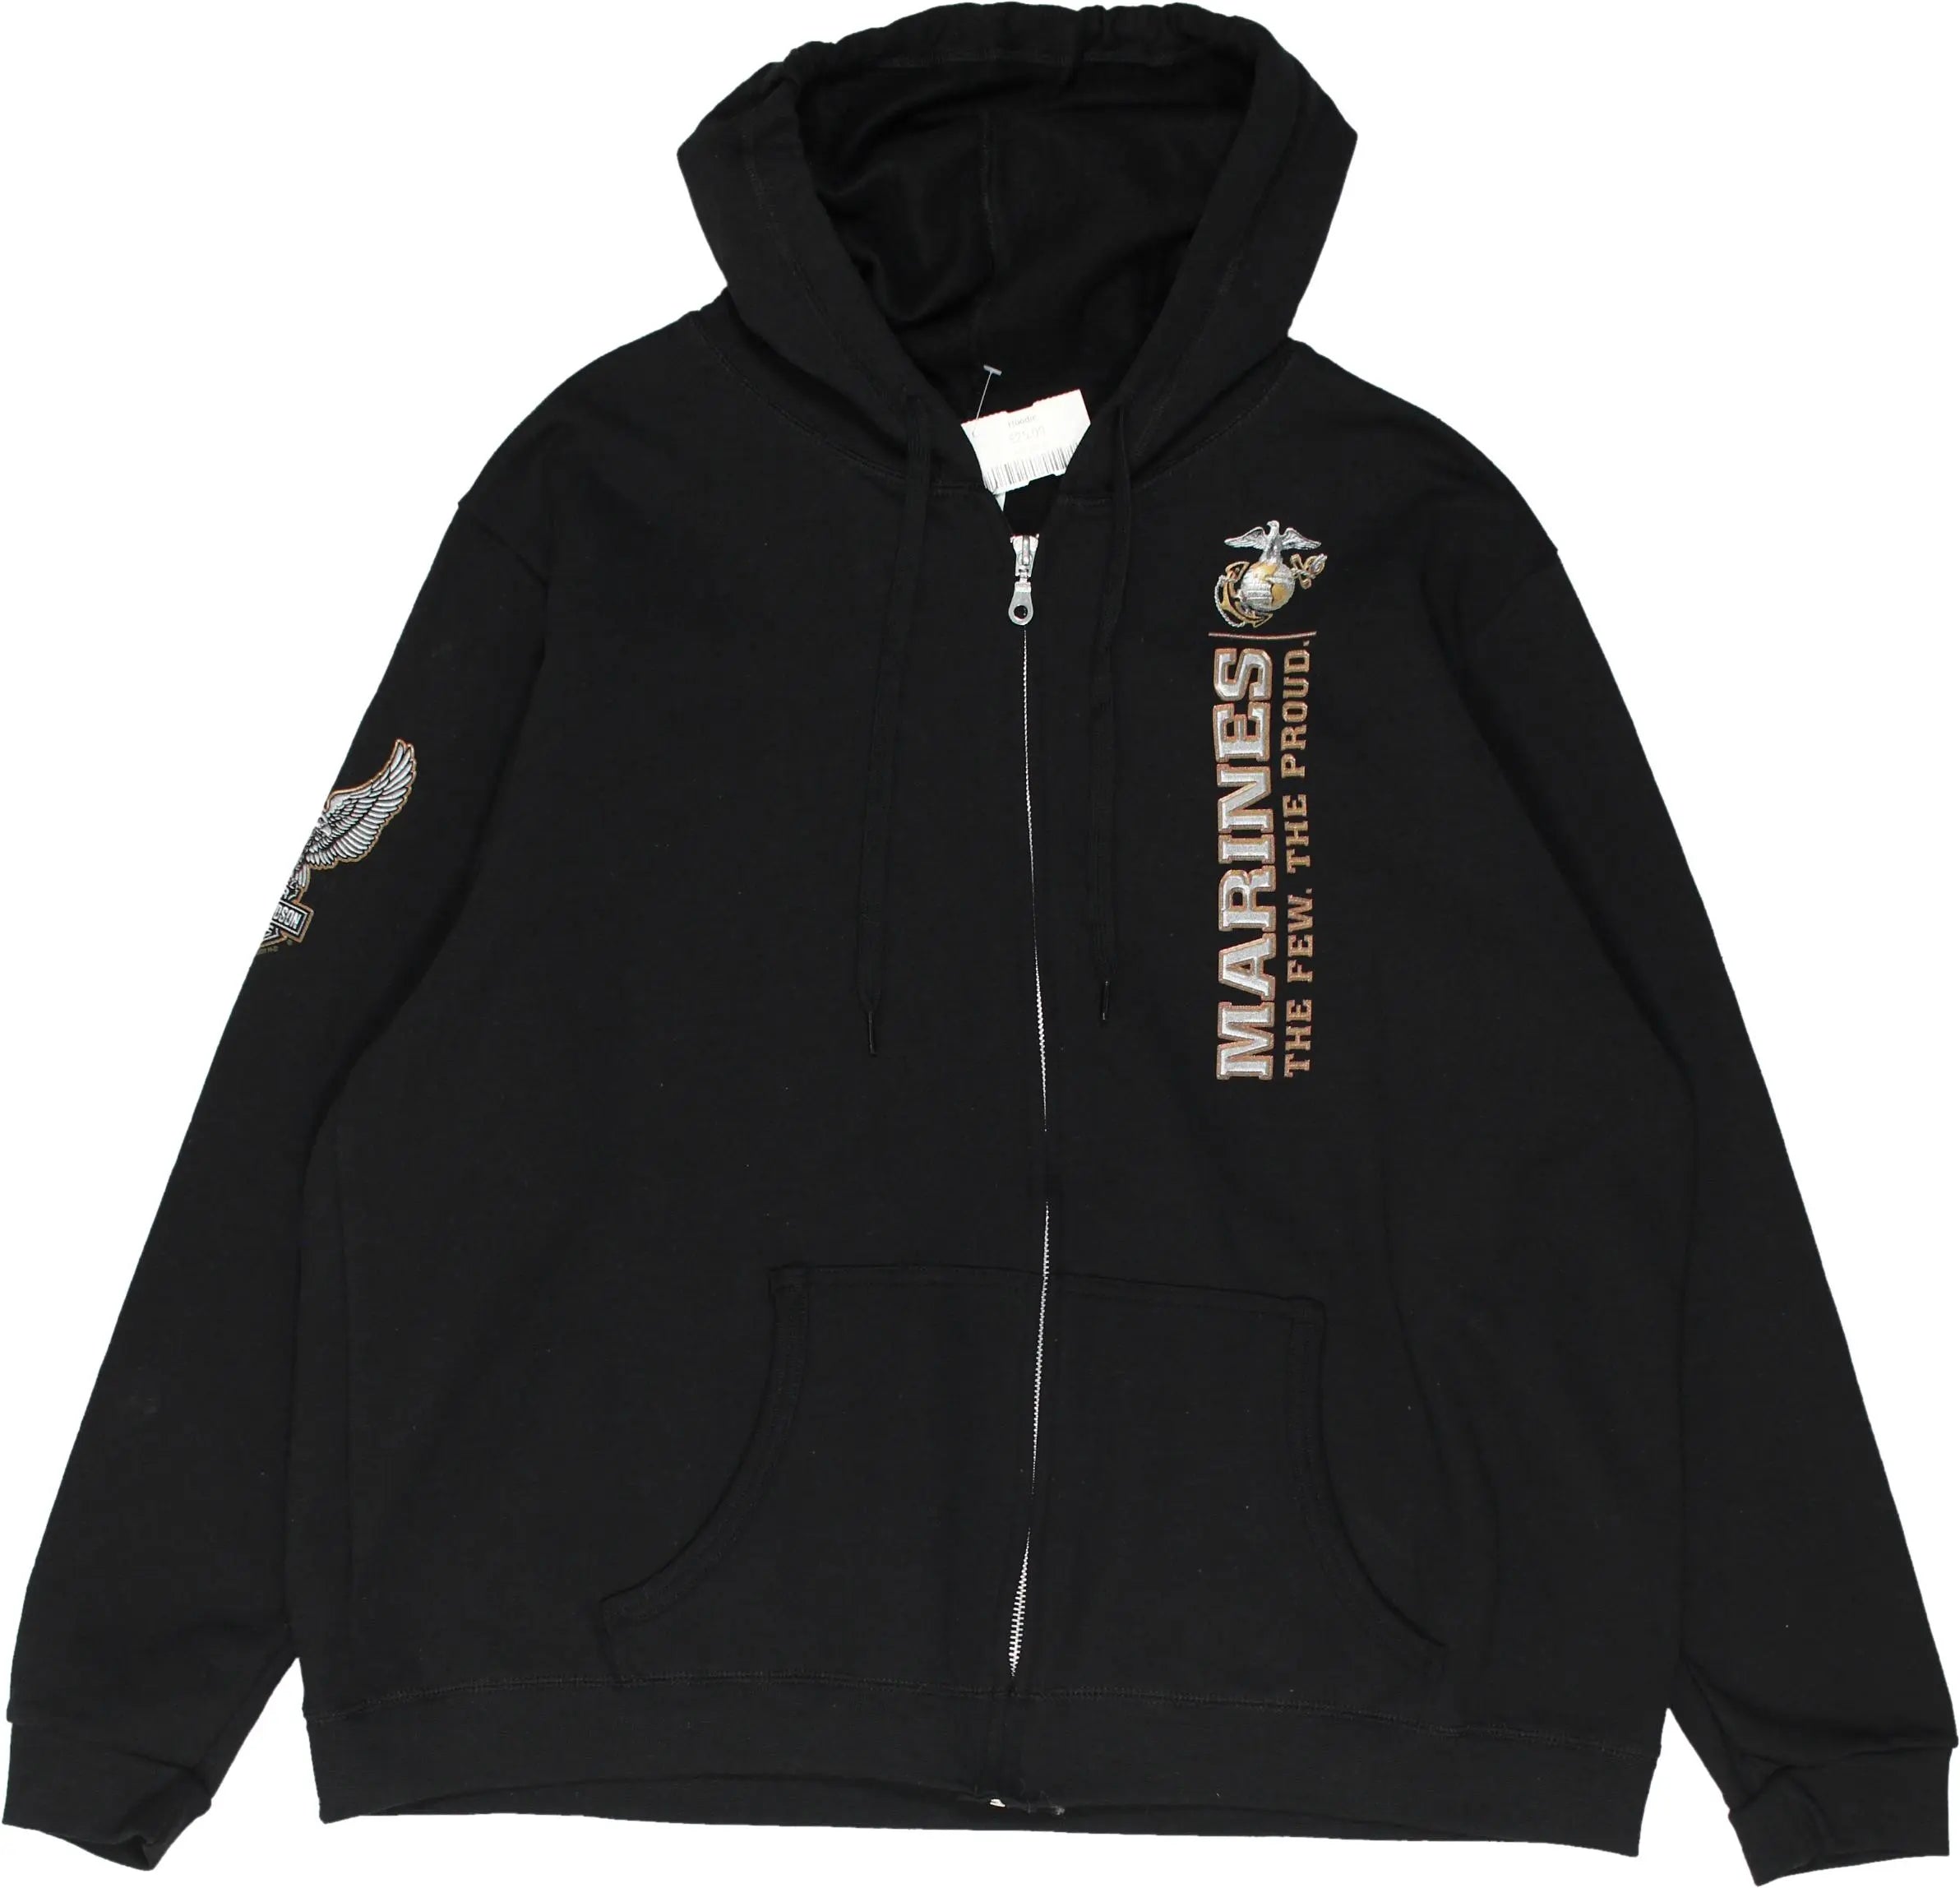 Harley Davidson - Hoodie by Harley Davidson- ThriftTale.com - Vintage and second handclothing